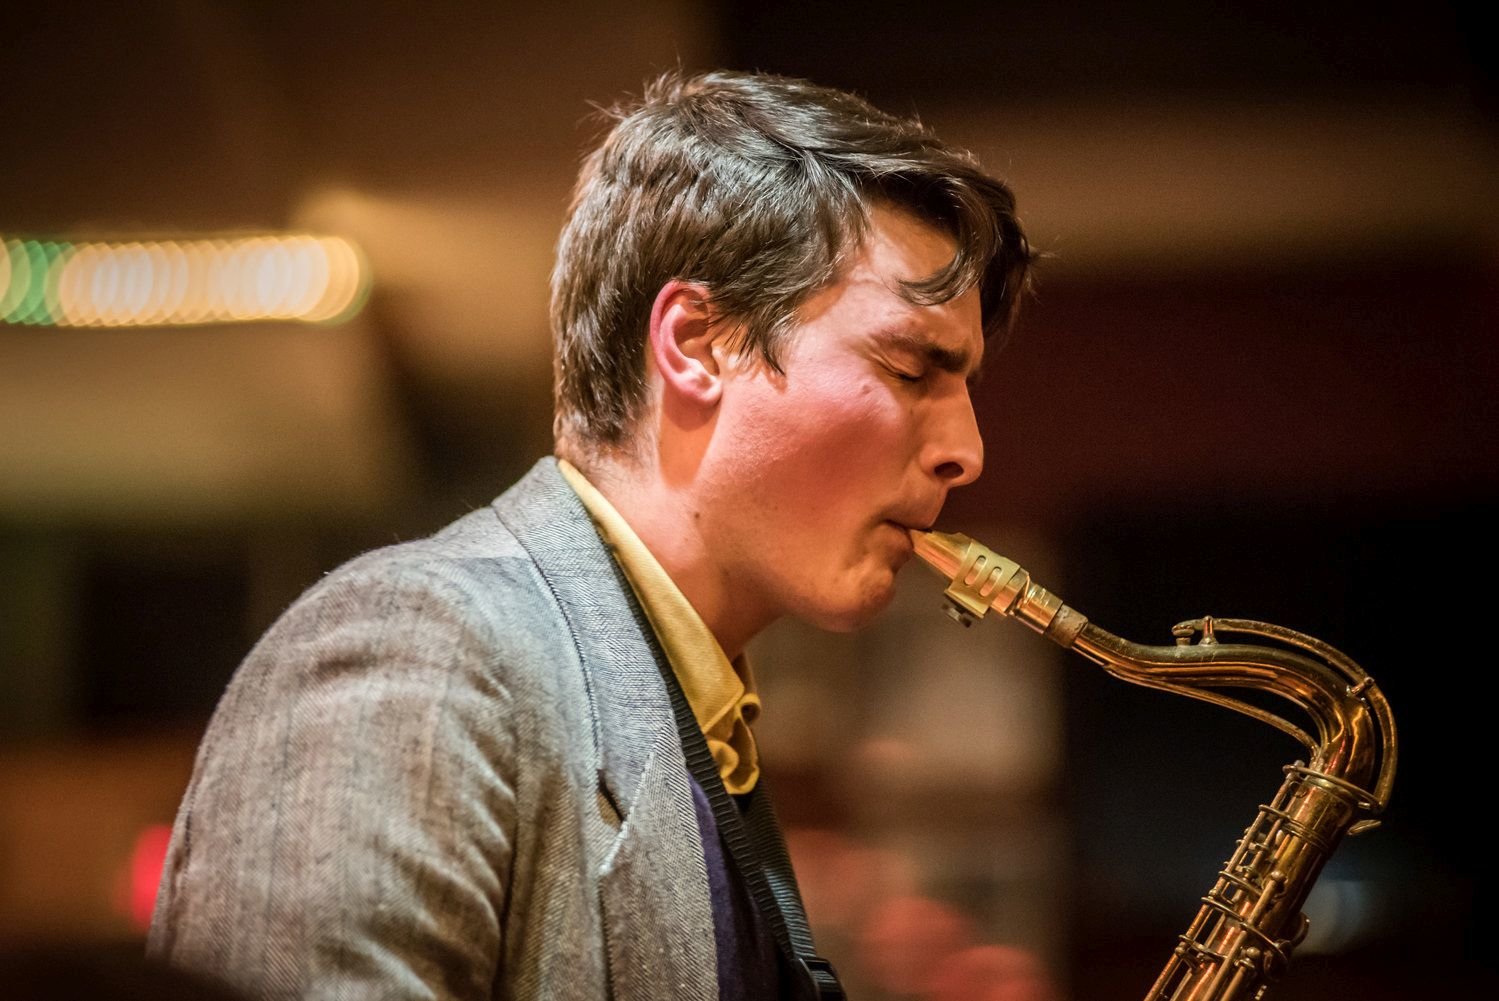 Composer and saxophonist Jack Saint Clair will perform in Newtown.